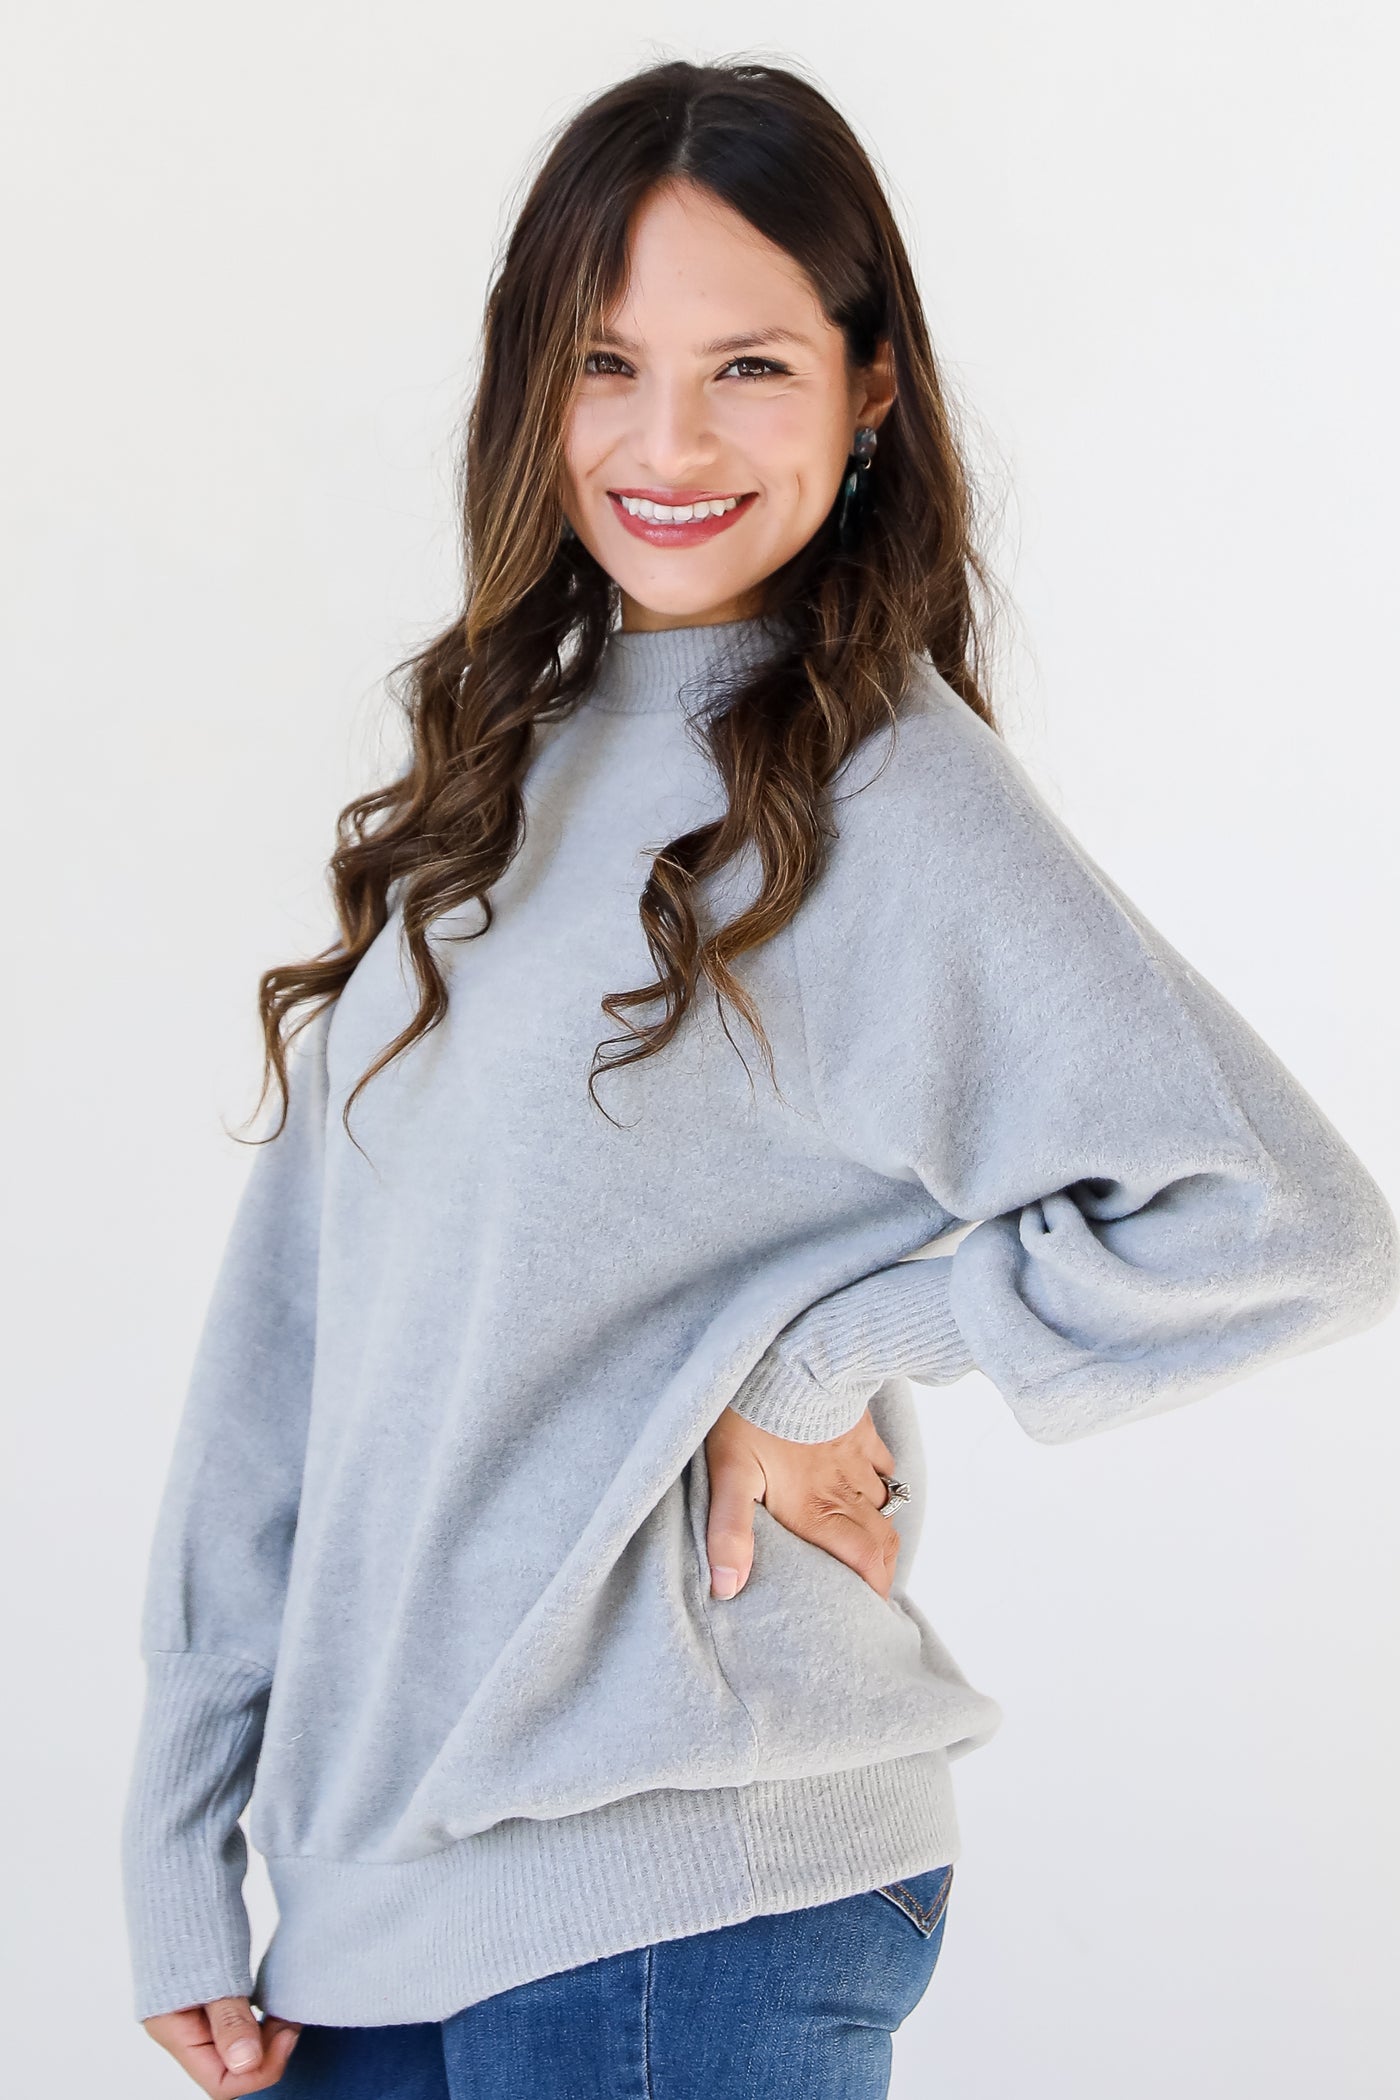 Cozy Brushed Knit Top side view